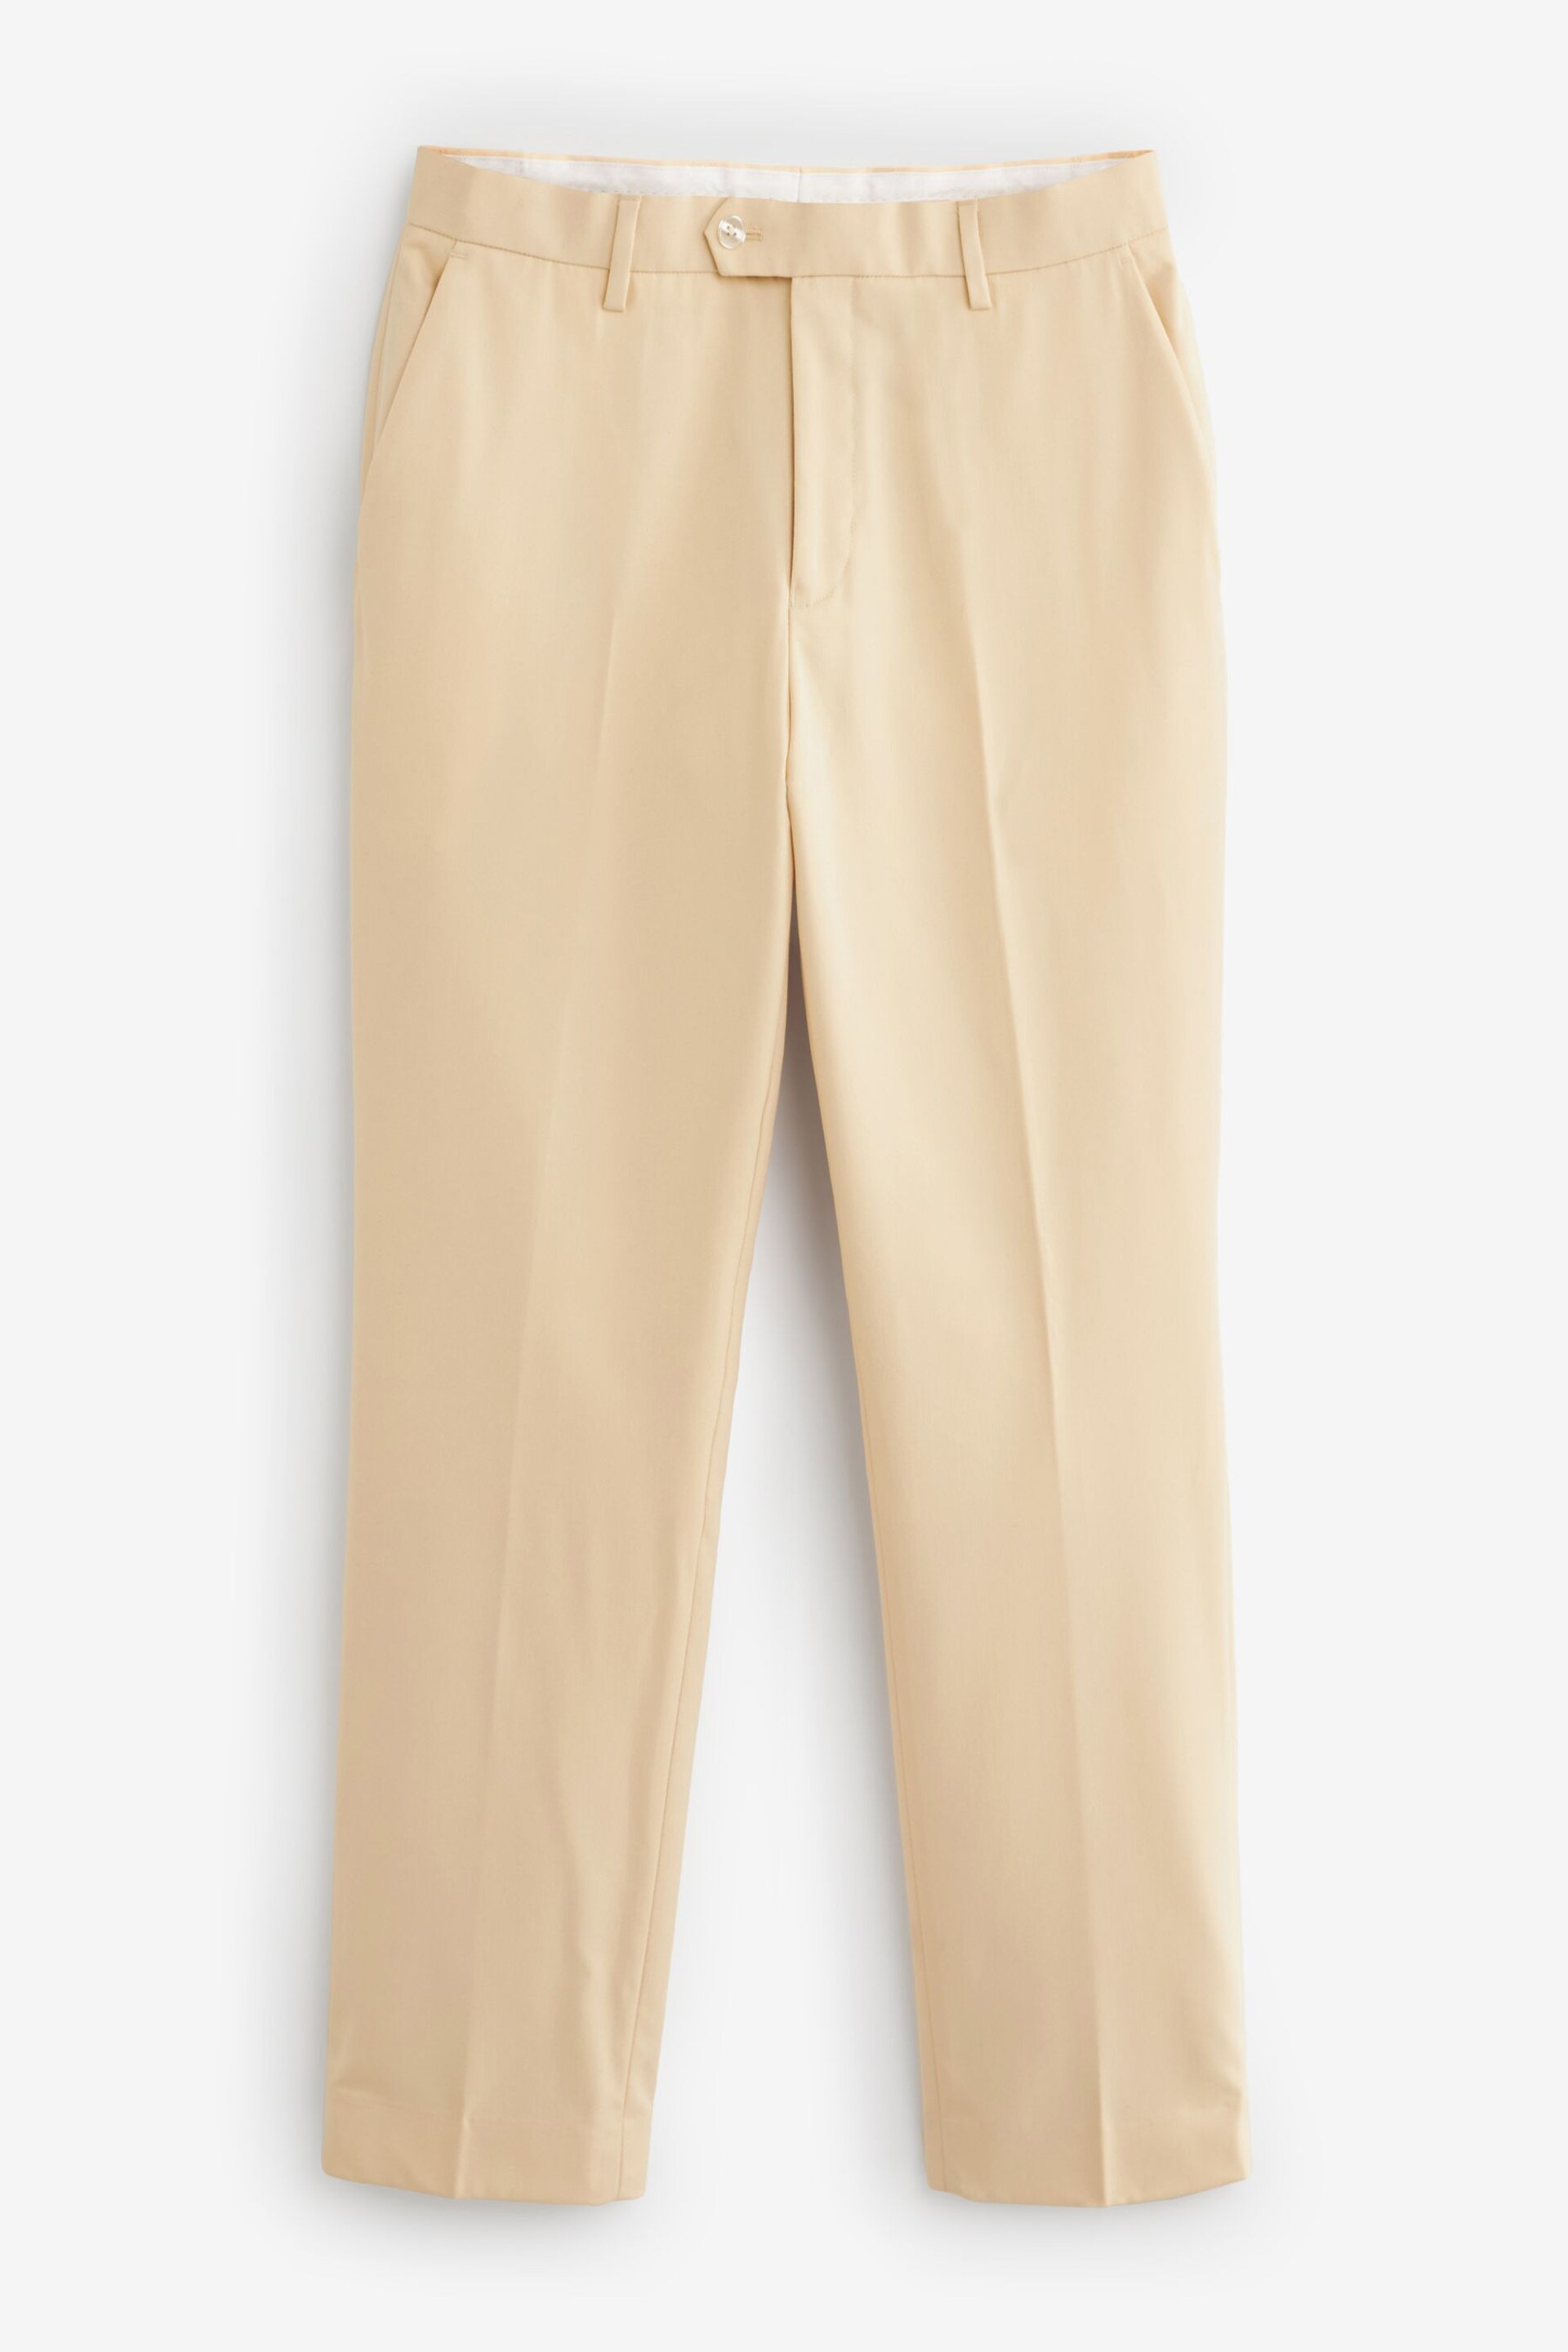 Yellow Slim Fit Motionflex Stretch Suit: Trousers - Image 6 of 9